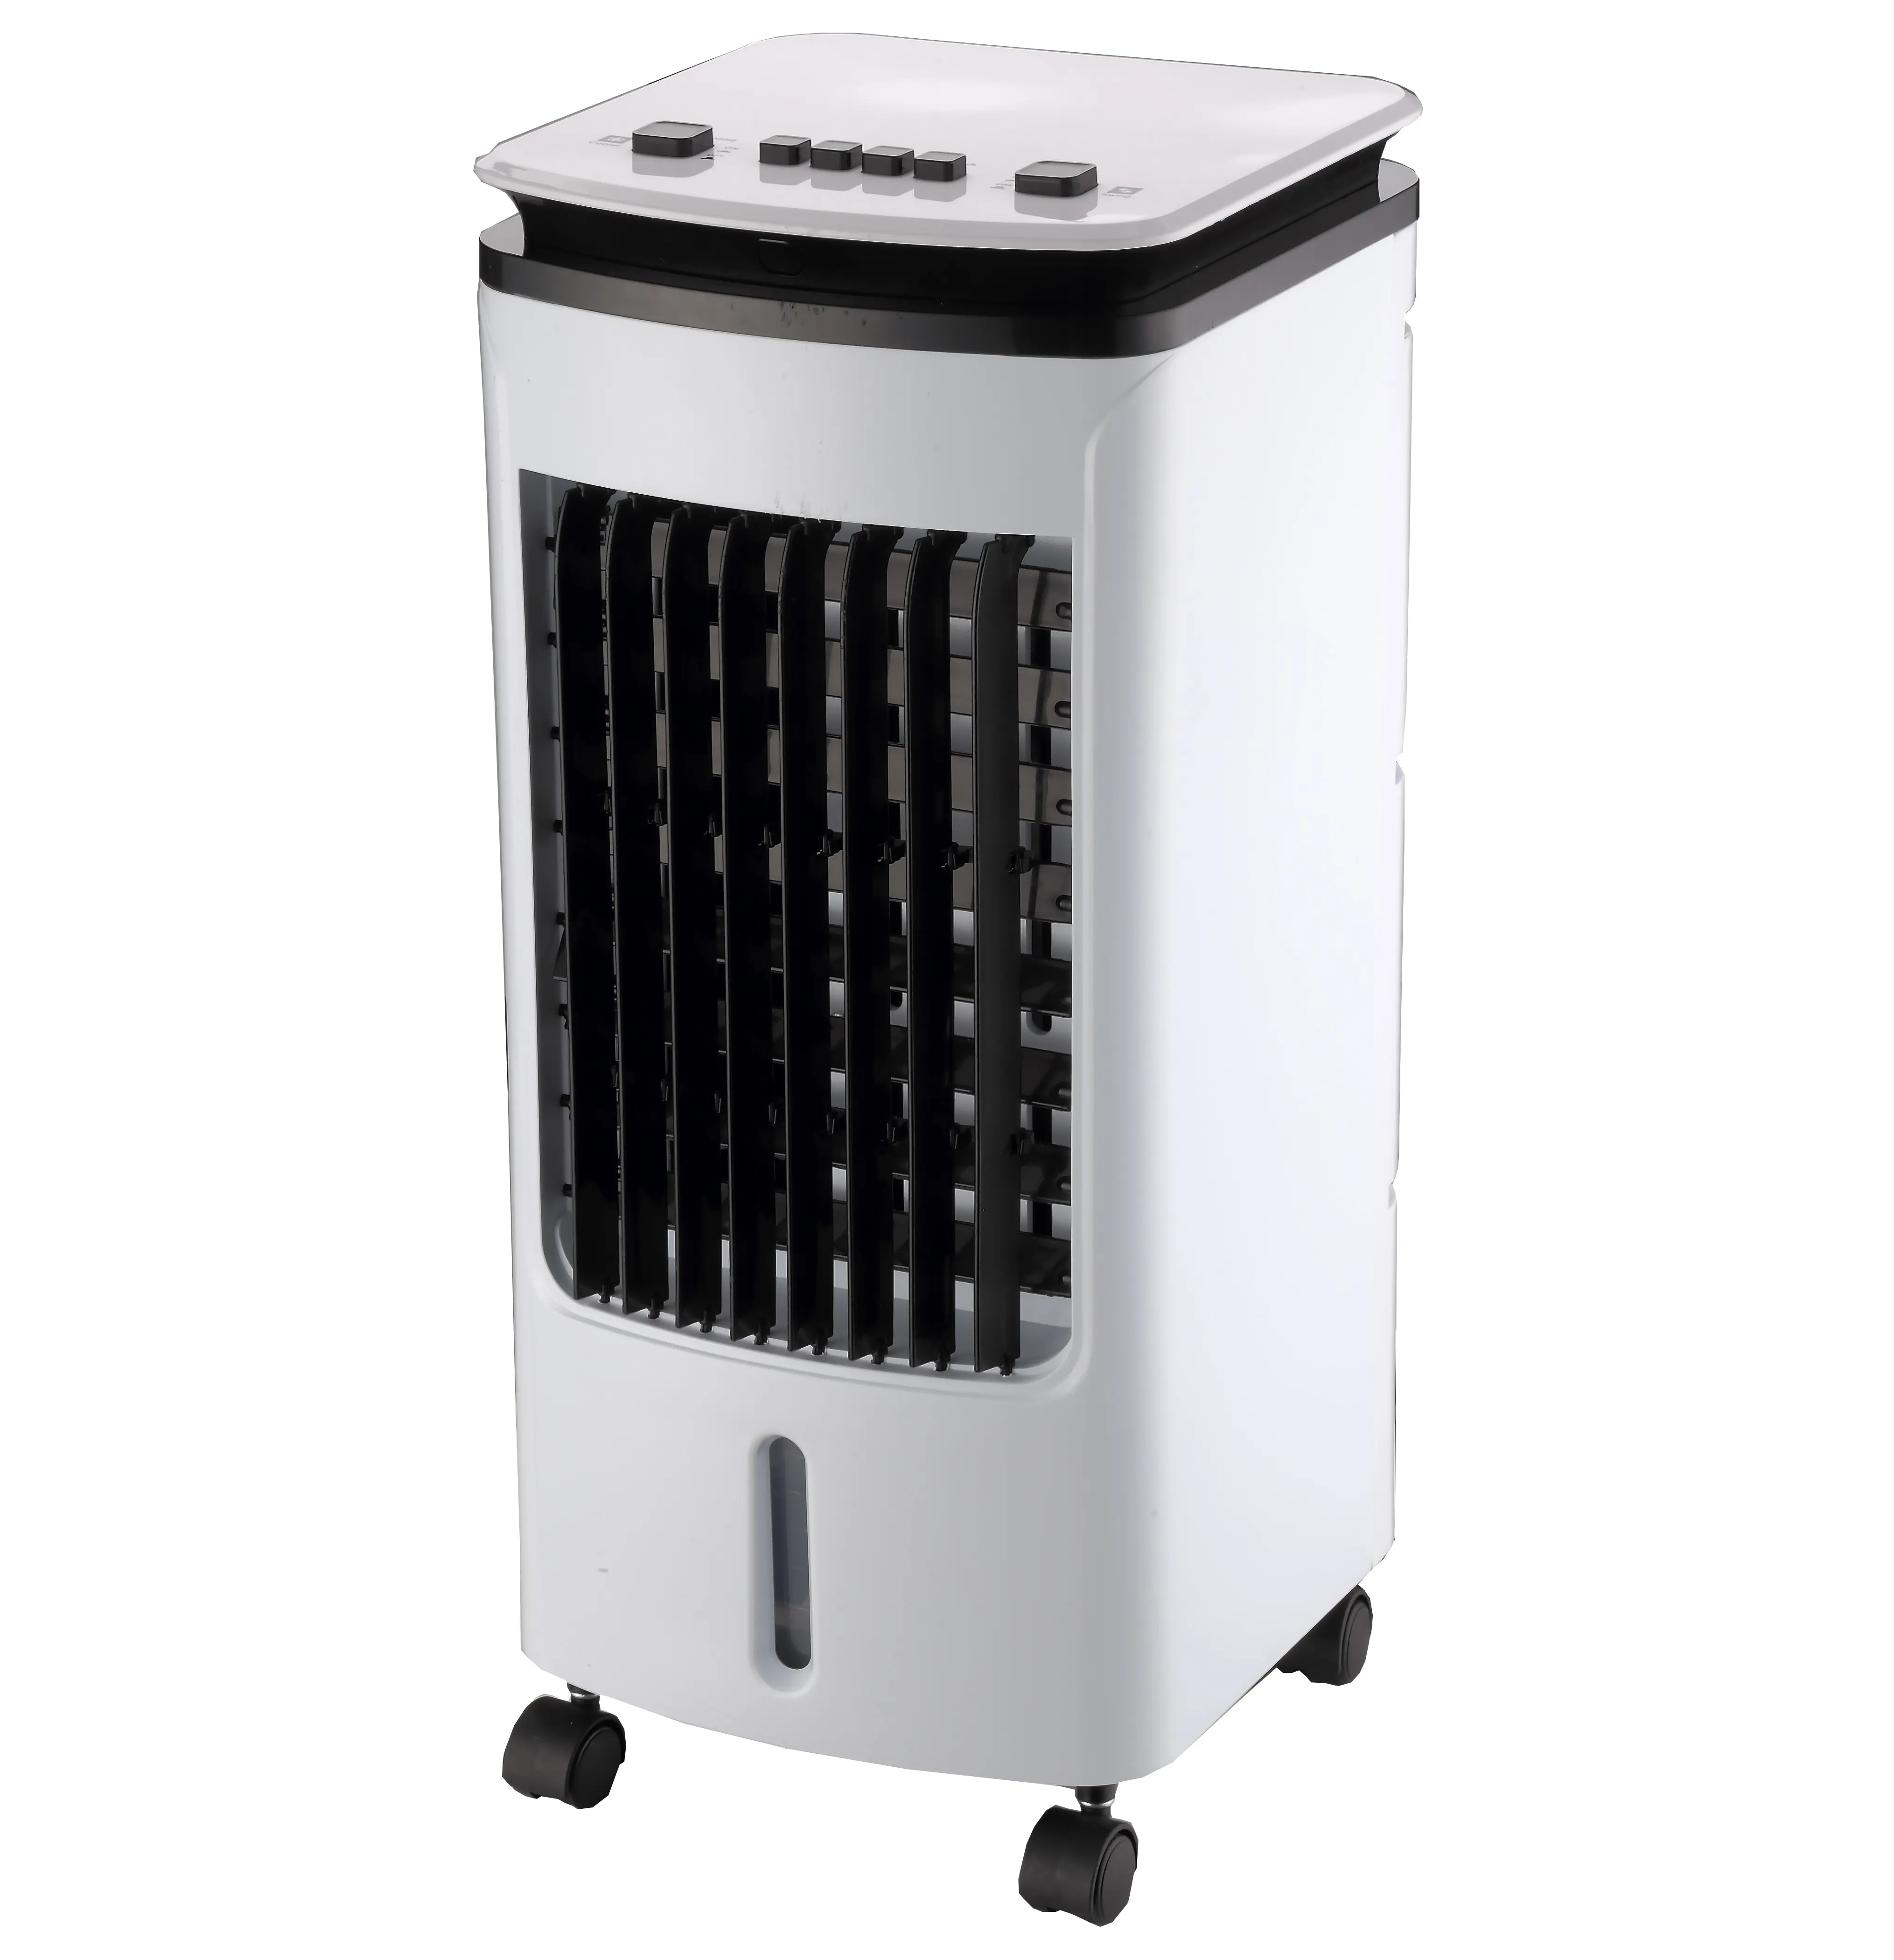 Hot sale Air Cooler Portable Household Cooler Office Cooler Humidifier Purifier